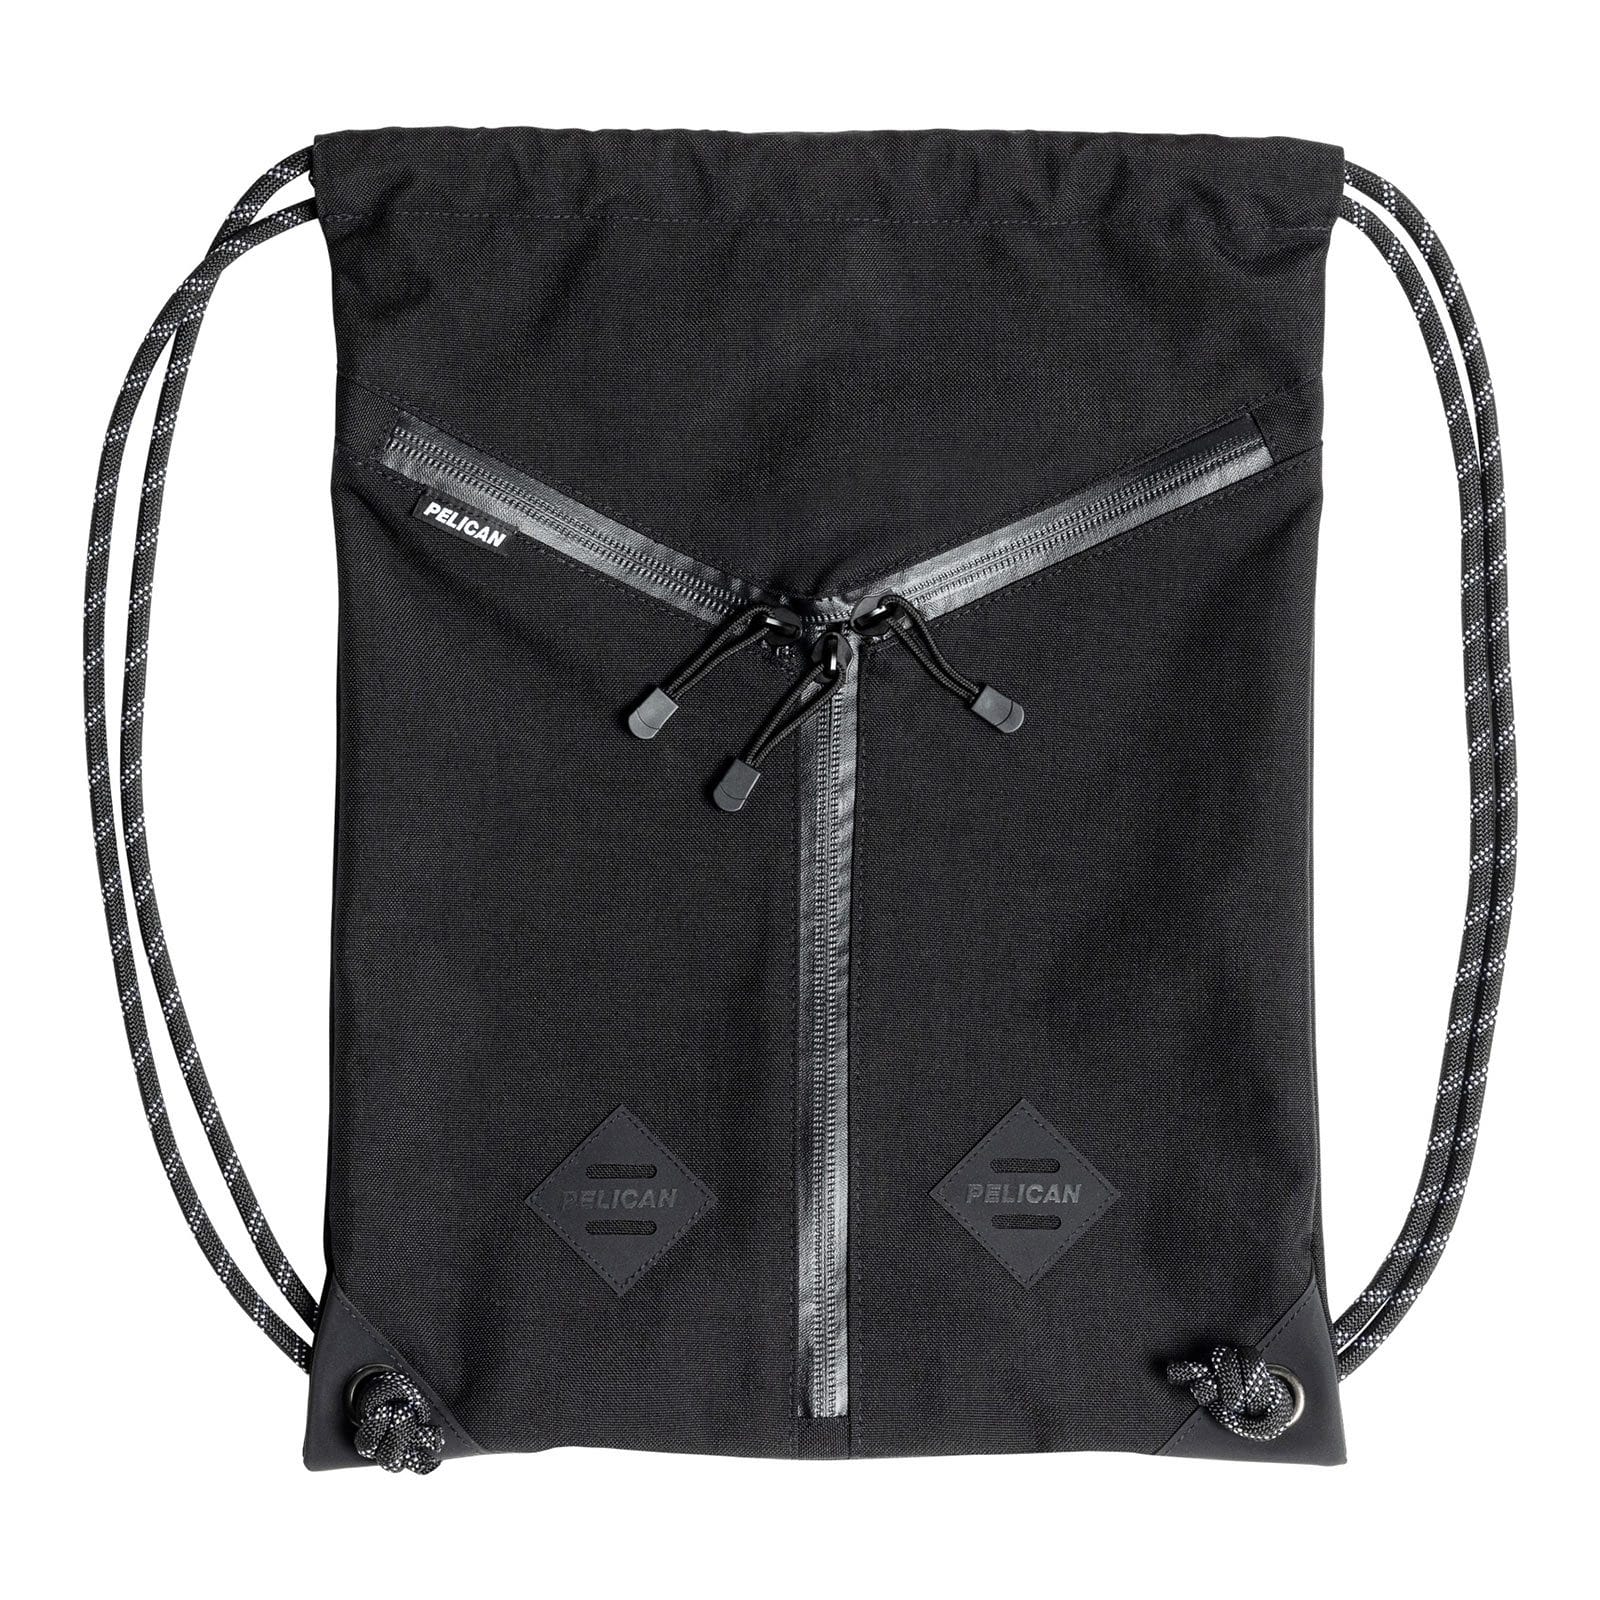 Nylon Travel Backpack - Stealth Black Field Pack | Pelican Outdoor